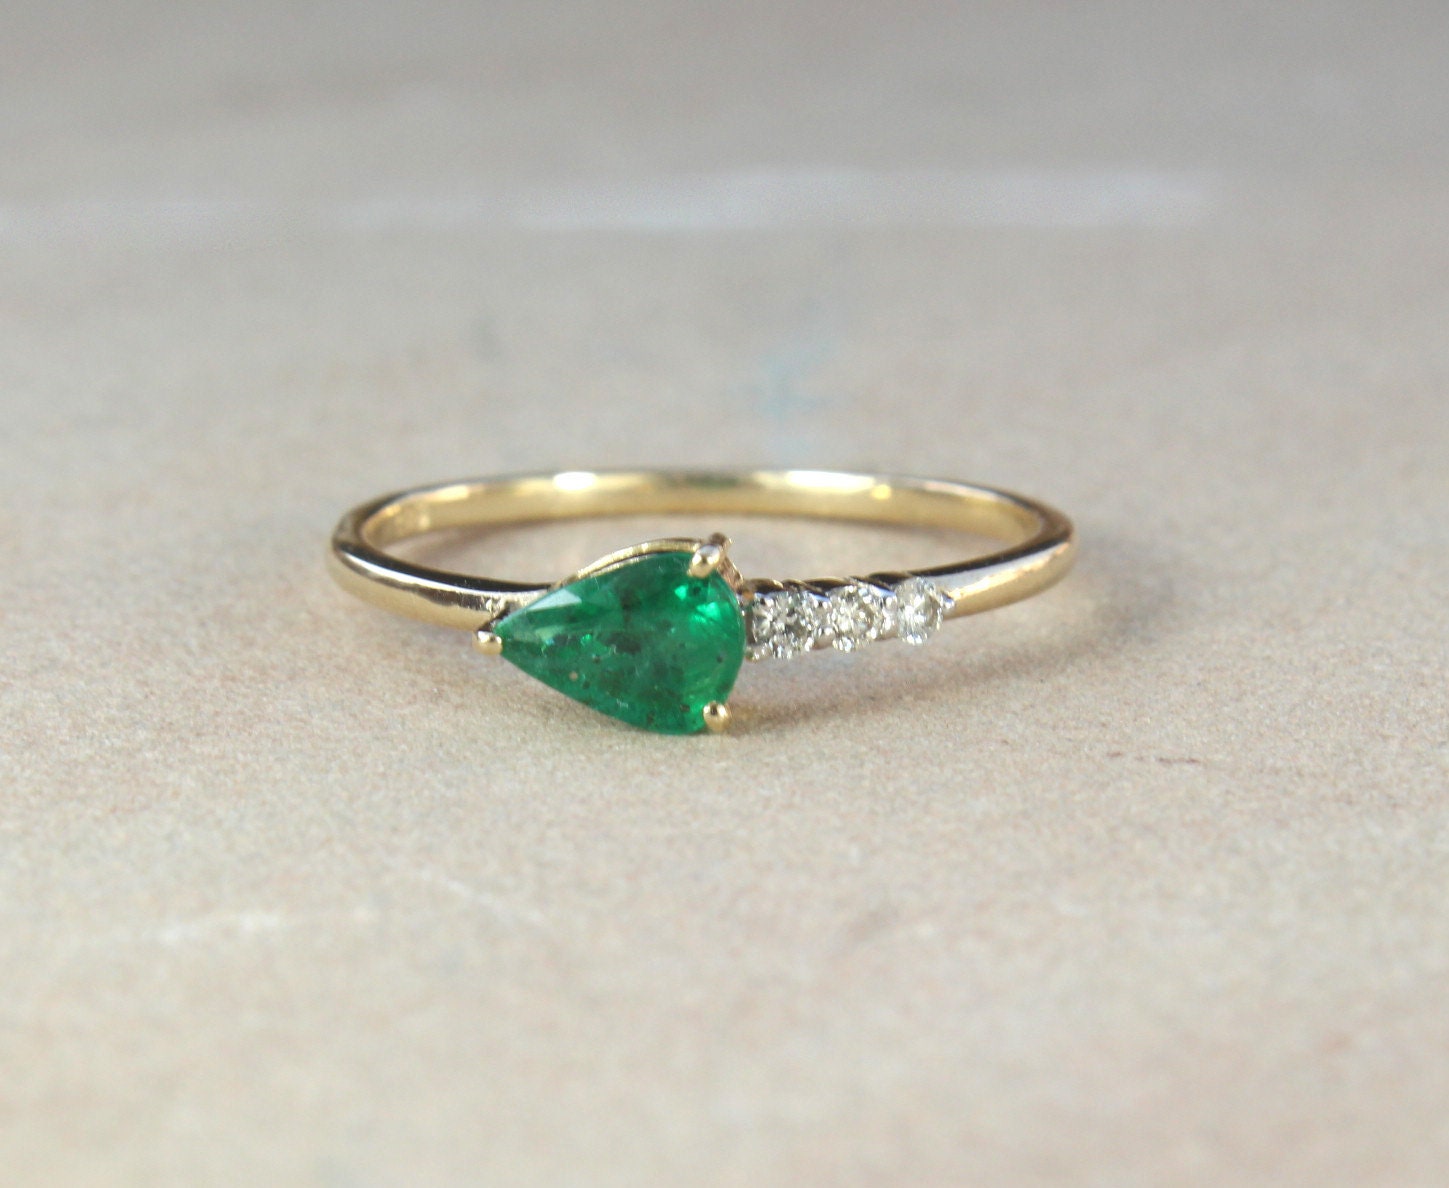 Natural Handmade Emerald and Diamond Ring in 14k yellow gold | Etsy